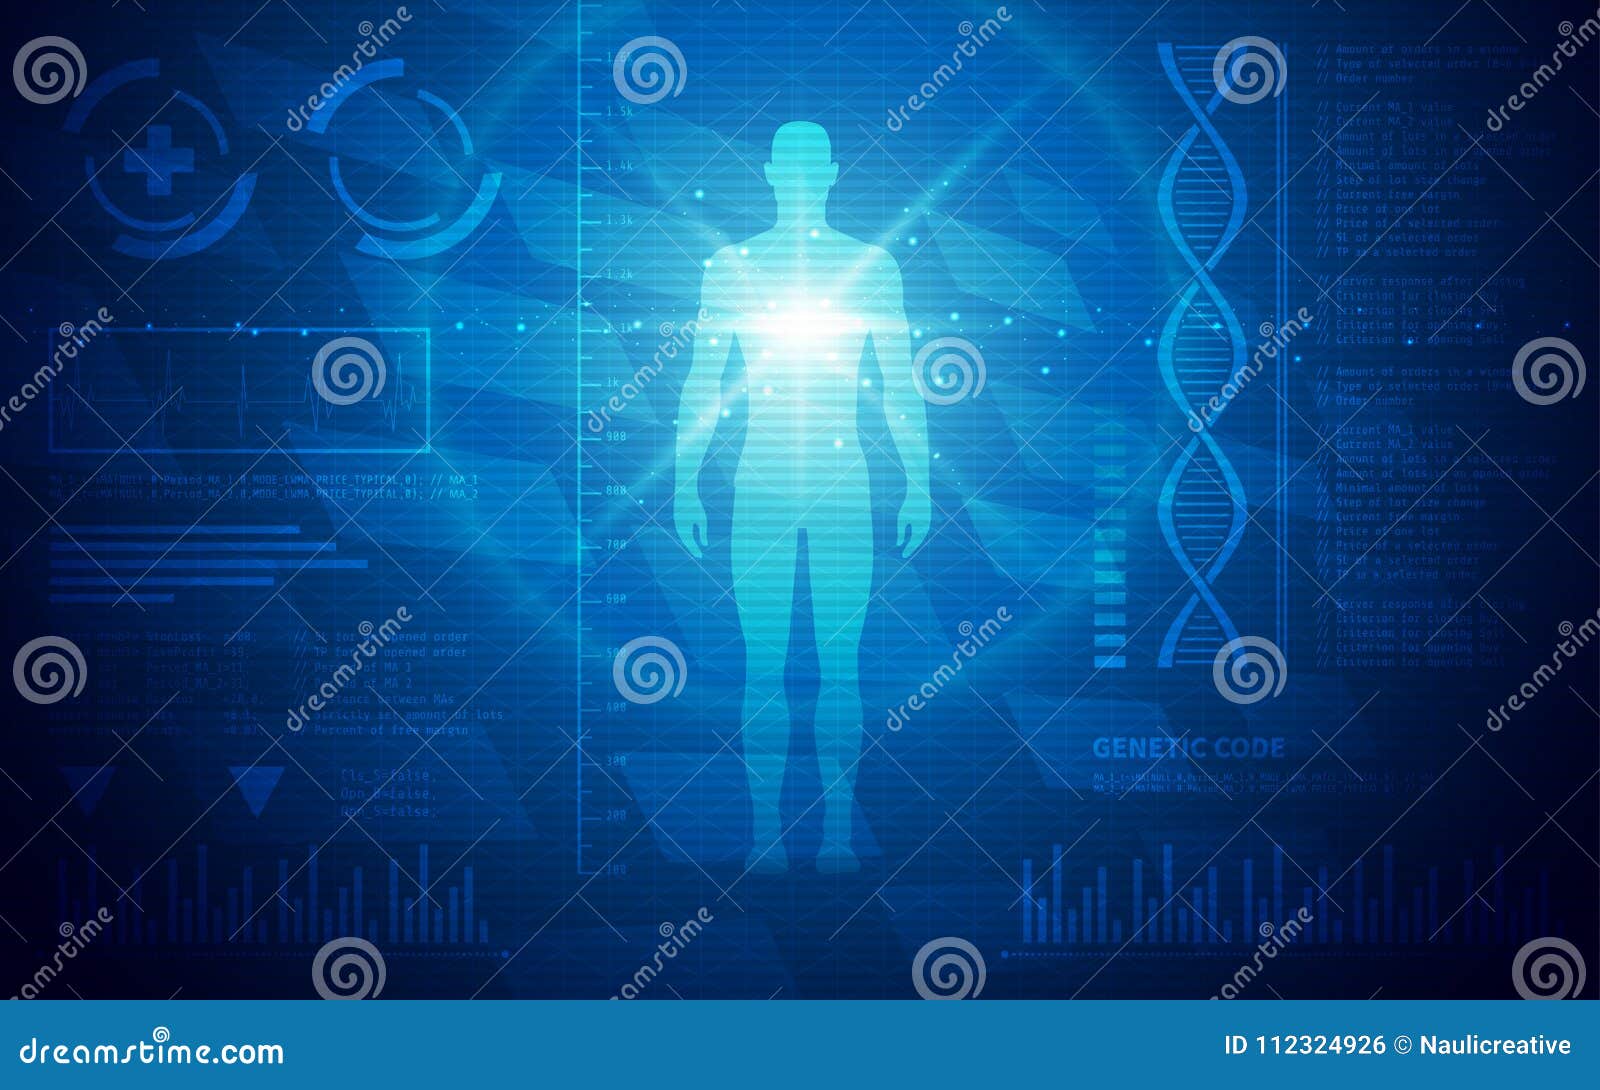 Ultra HD Abstract Sci Fi Human Anatomy Medical Wallpaper Stock Vector -  Illustration of abstract, graphic: 112324926